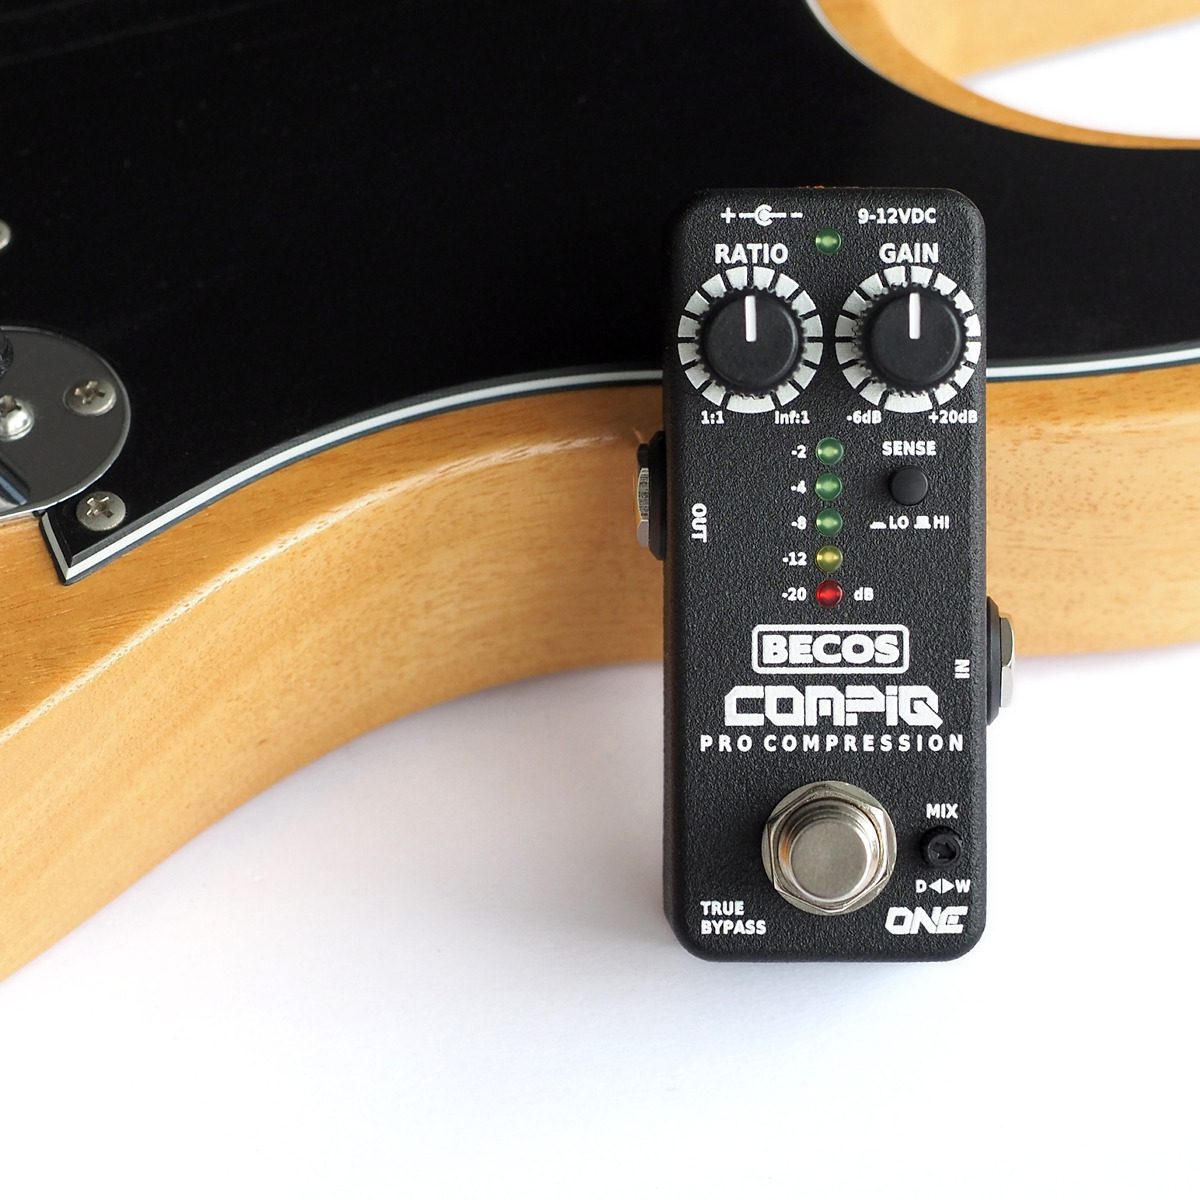 BECOS Effects releases the CompIQ MINI ONE Pro Compressor – BECOSFX